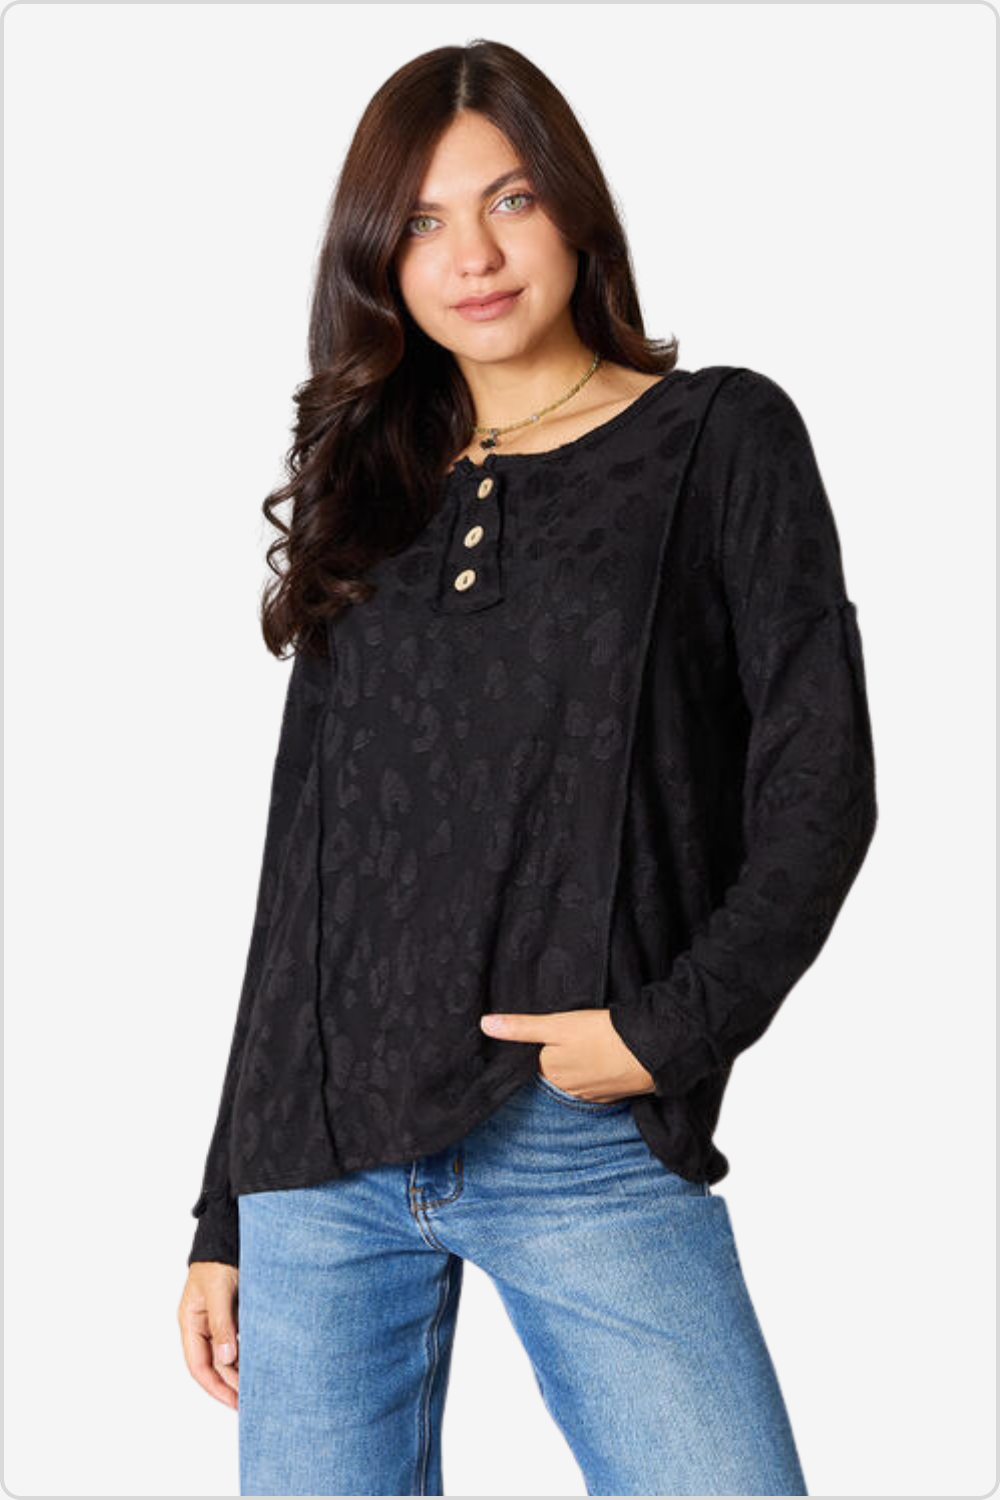 Stylish Model in Elegant Button Front Blouse with Cozy Feel